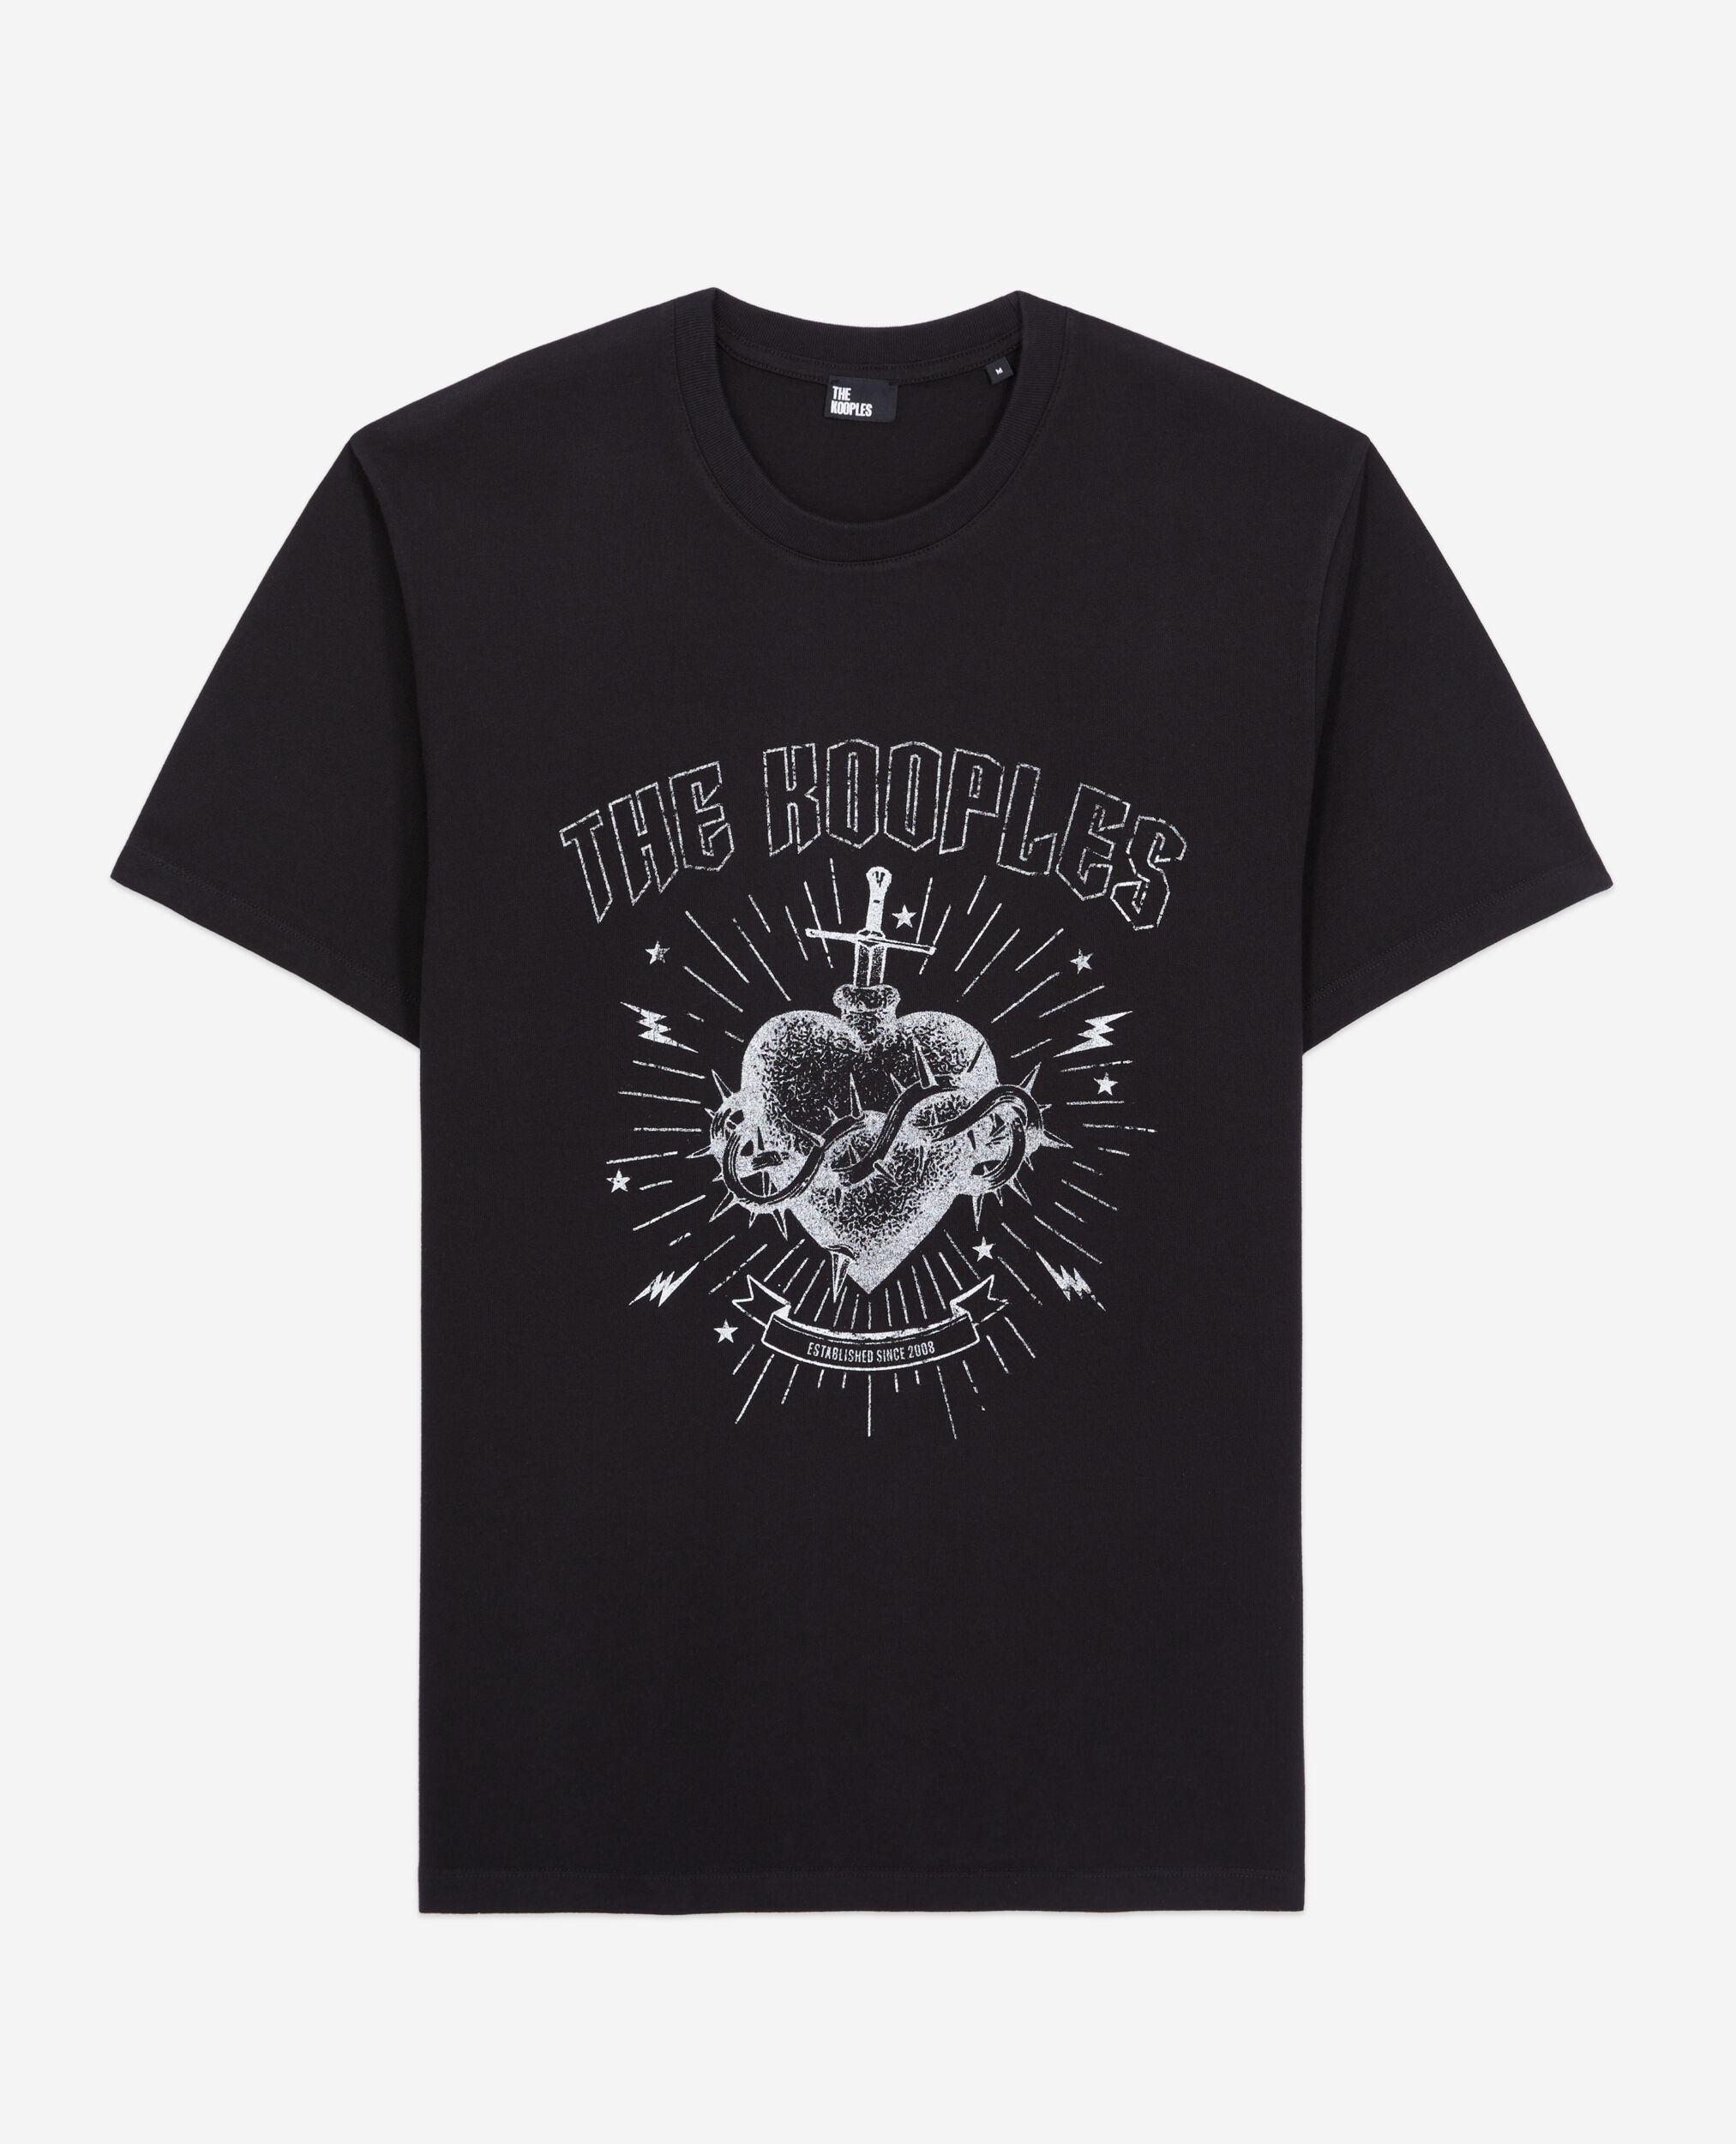 Men's black t-shirt with dagger through heart serigraphy, BLACK WASHED, hi-res image number null